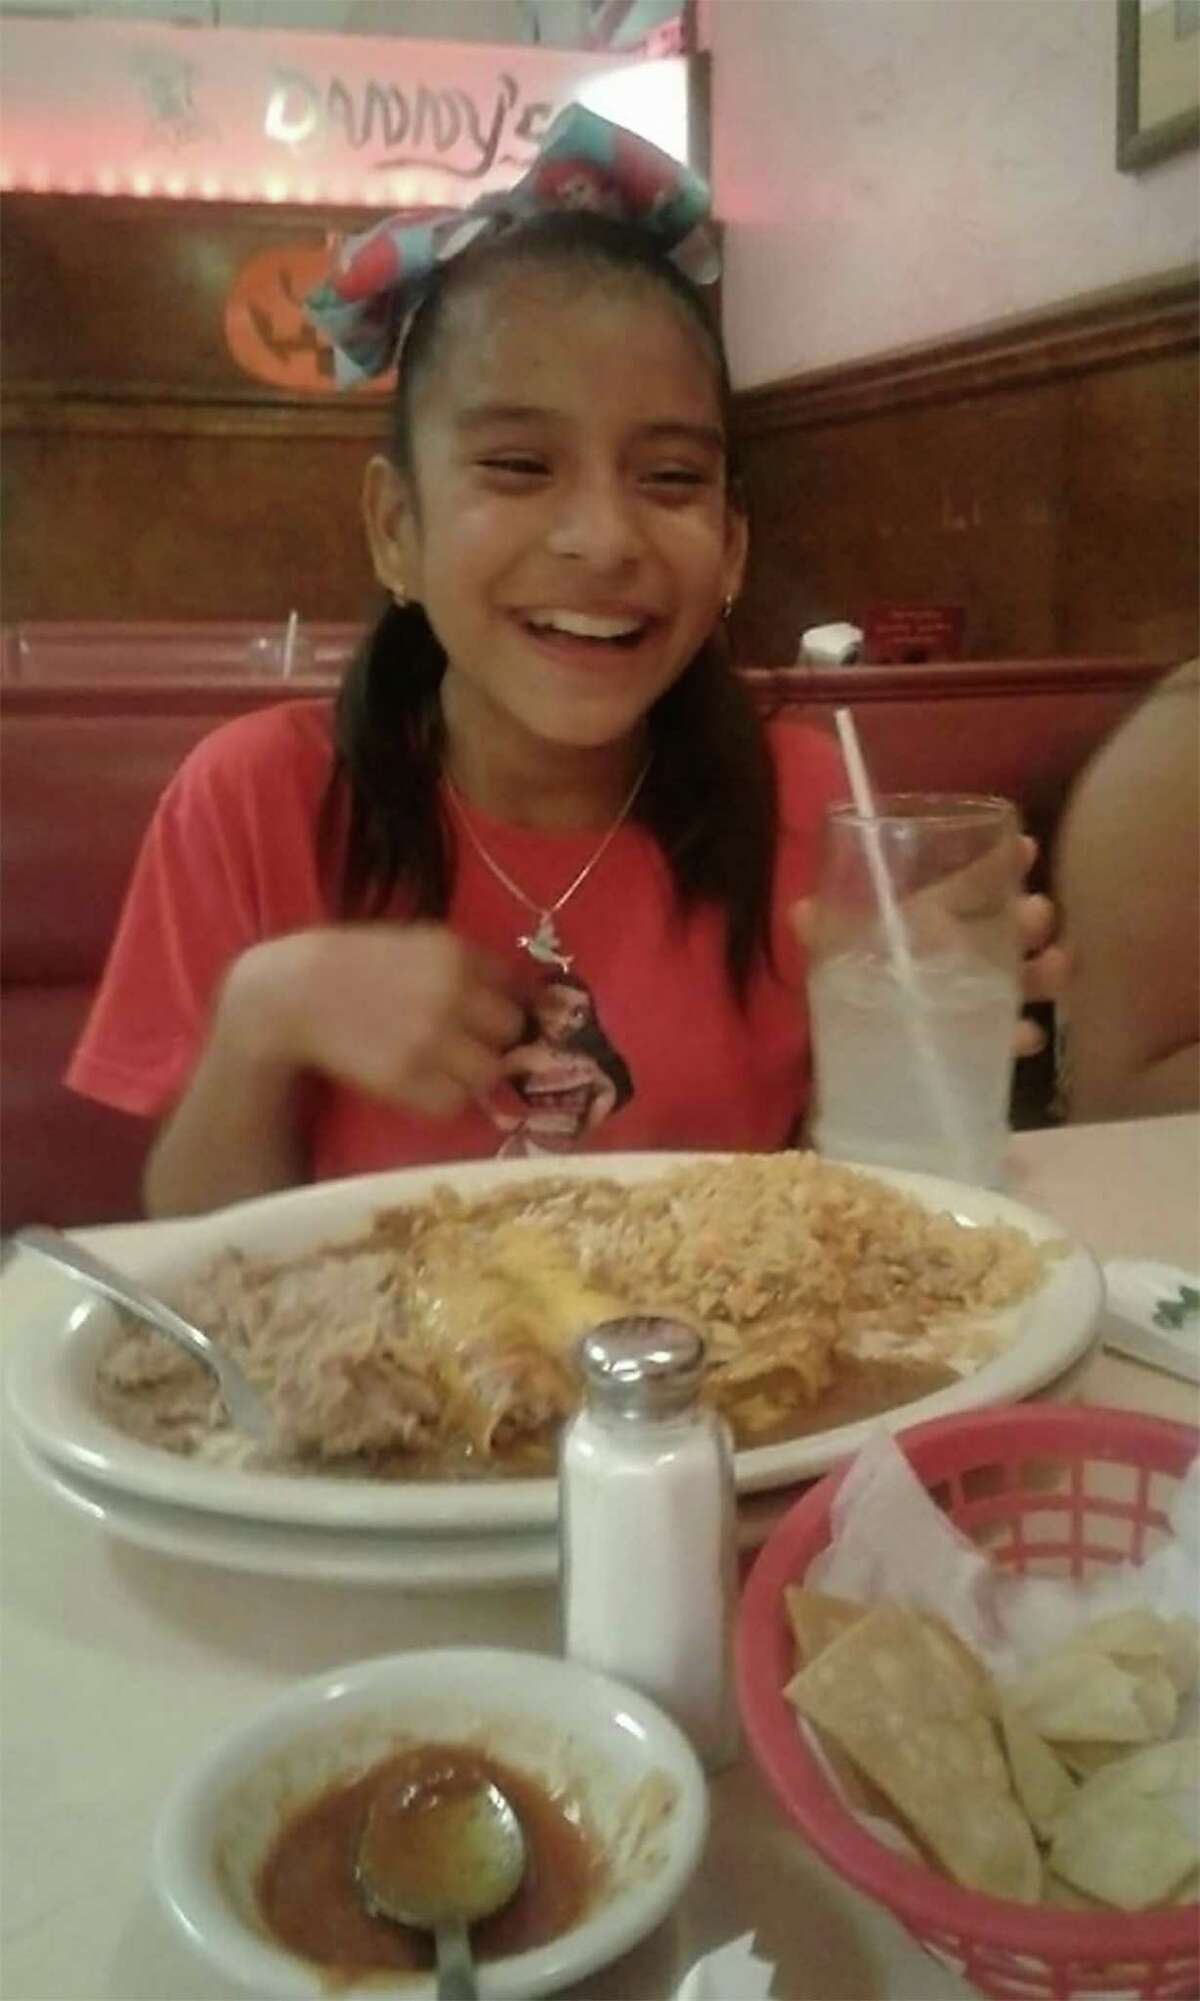 Rosemarie Hernandez, 10, who underwent gall bladder surgery in a Corpus Christi hospital, does not have legal immigrant status and may be sent to a detention facility after being released from the hospital. She faces deportation with her mother, Felipa Delacruz, who also lacks legal immigrant status. Hernandez also has been diagnosed with cerebral palsy.